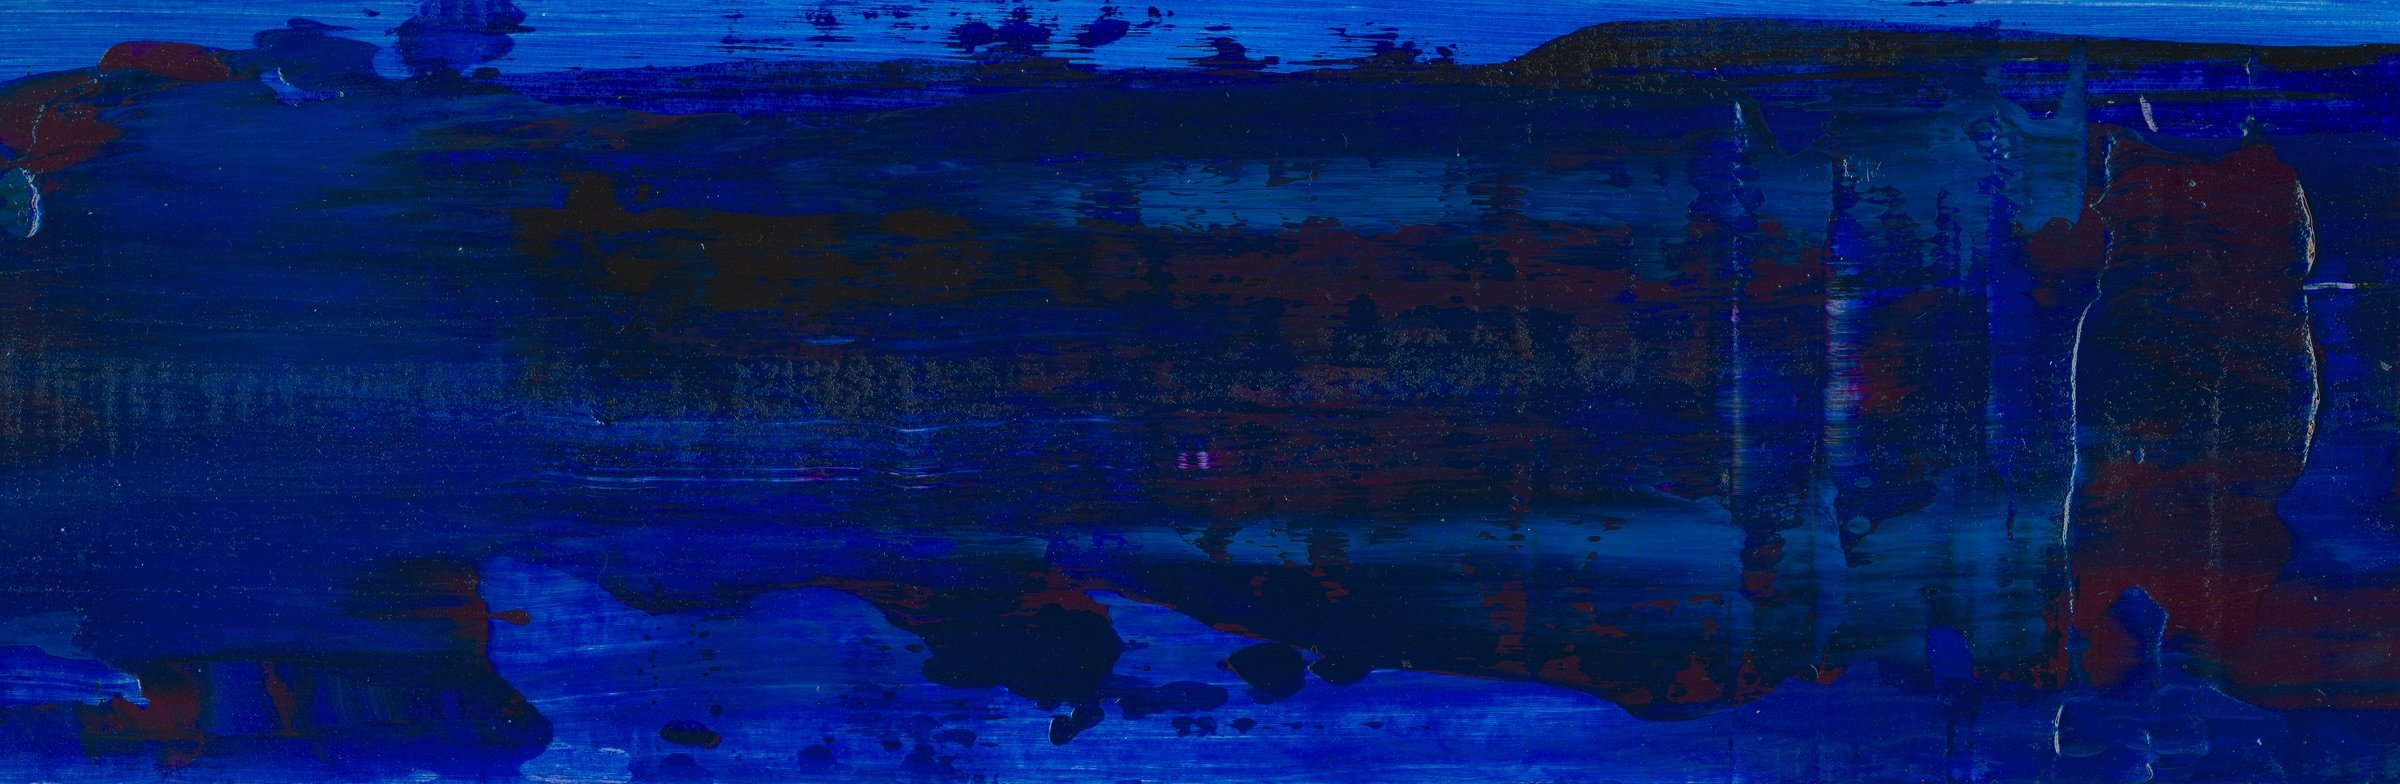 nocturnal IV, 2003